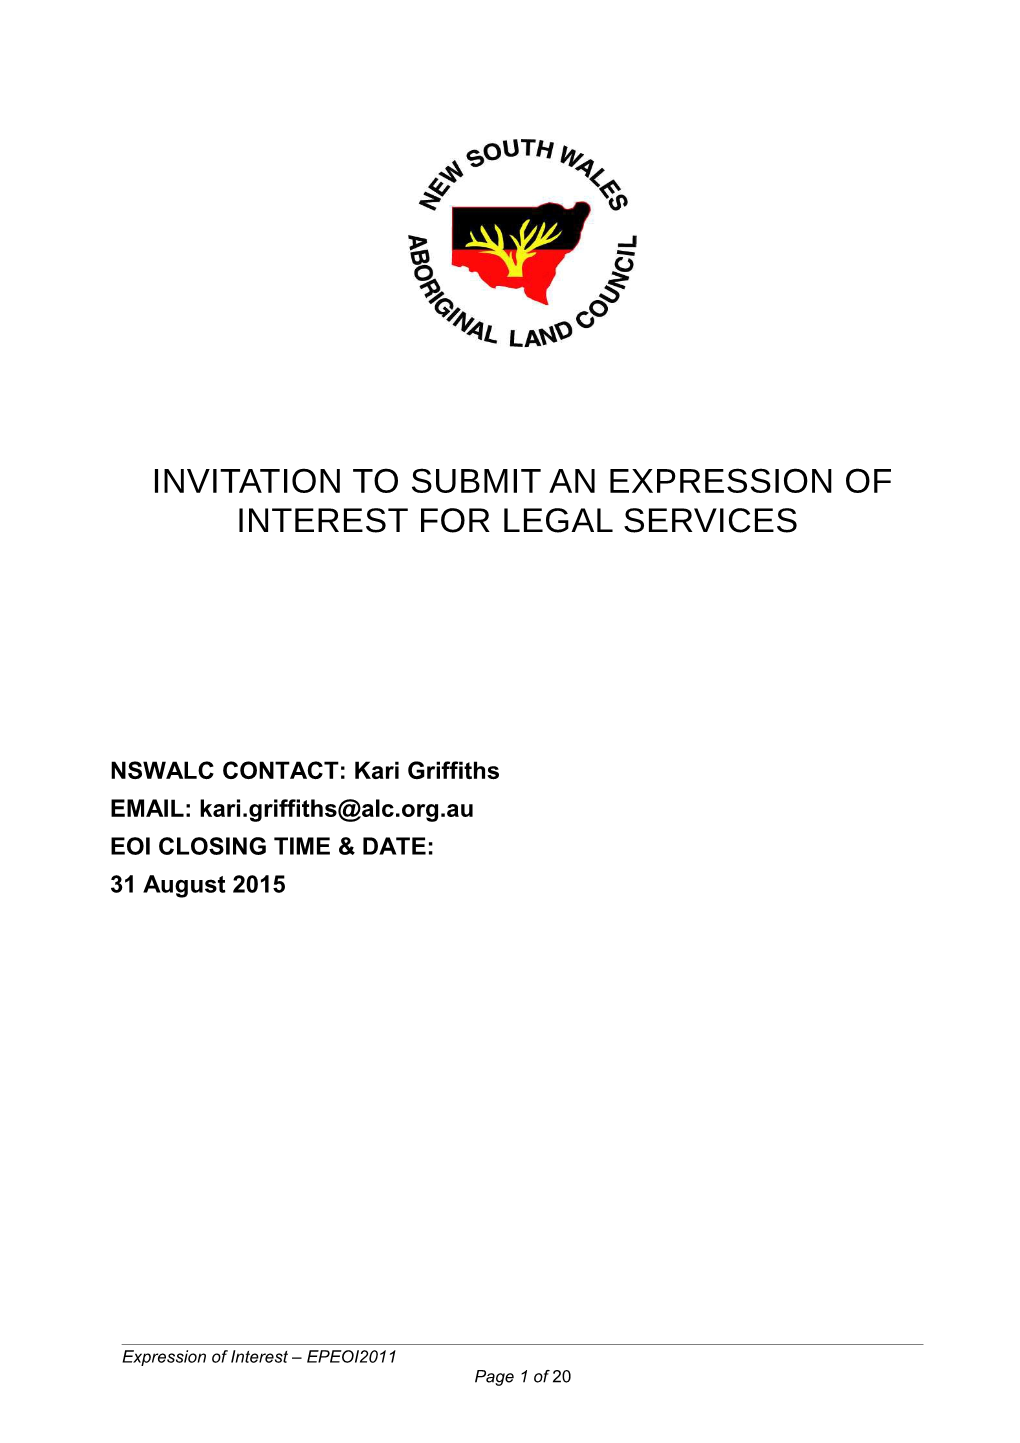 Invitation to Submit an Expression of Interest for Legal Services